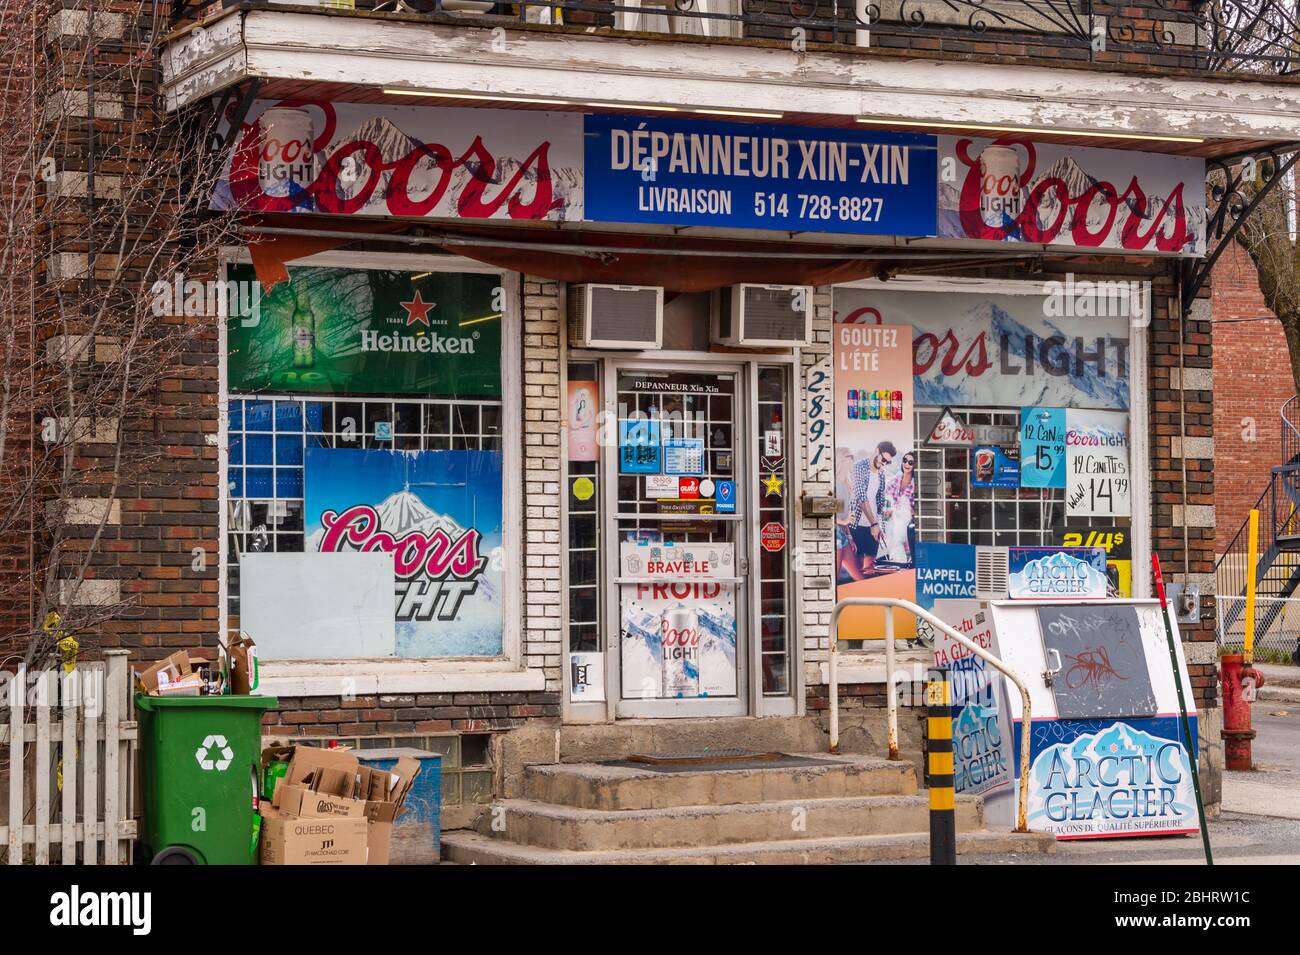 Montreal, CA - 27 April 2020: Facade of a traditional Depanneur convenience store on Dandurant street. Stock Photo